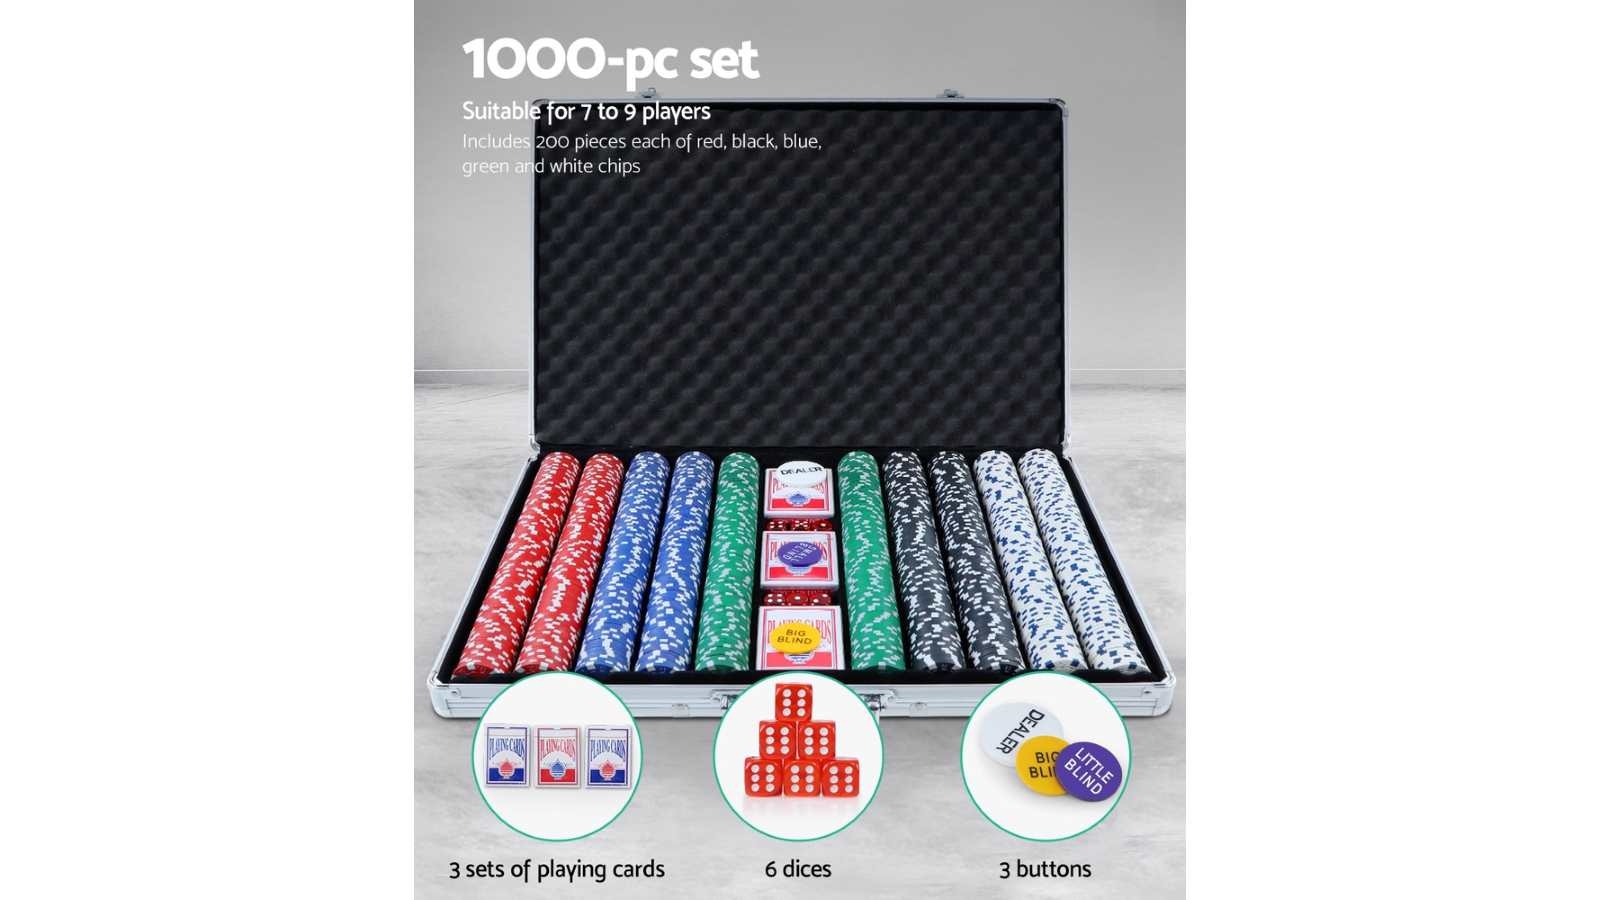 A Review Of The 1000 Ten Lineario Poker Chip Set